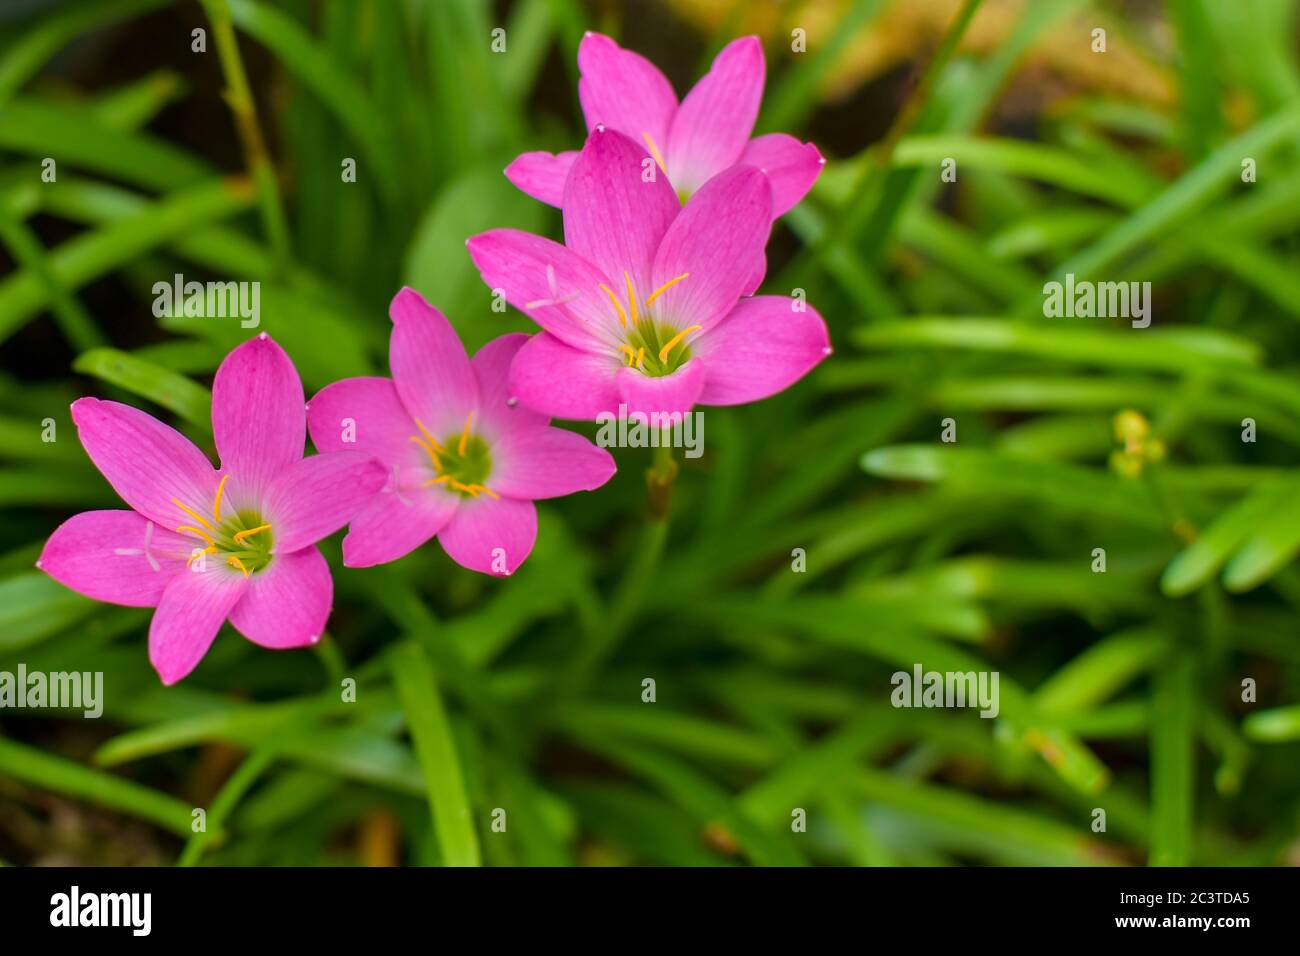 Zephyranthes rosea, commonly known as the Cuban zephyrlily, rosy rain lily, rose fairy lily, rose zephyr lily or the pink rain lily. They are cultivat Stock Photo